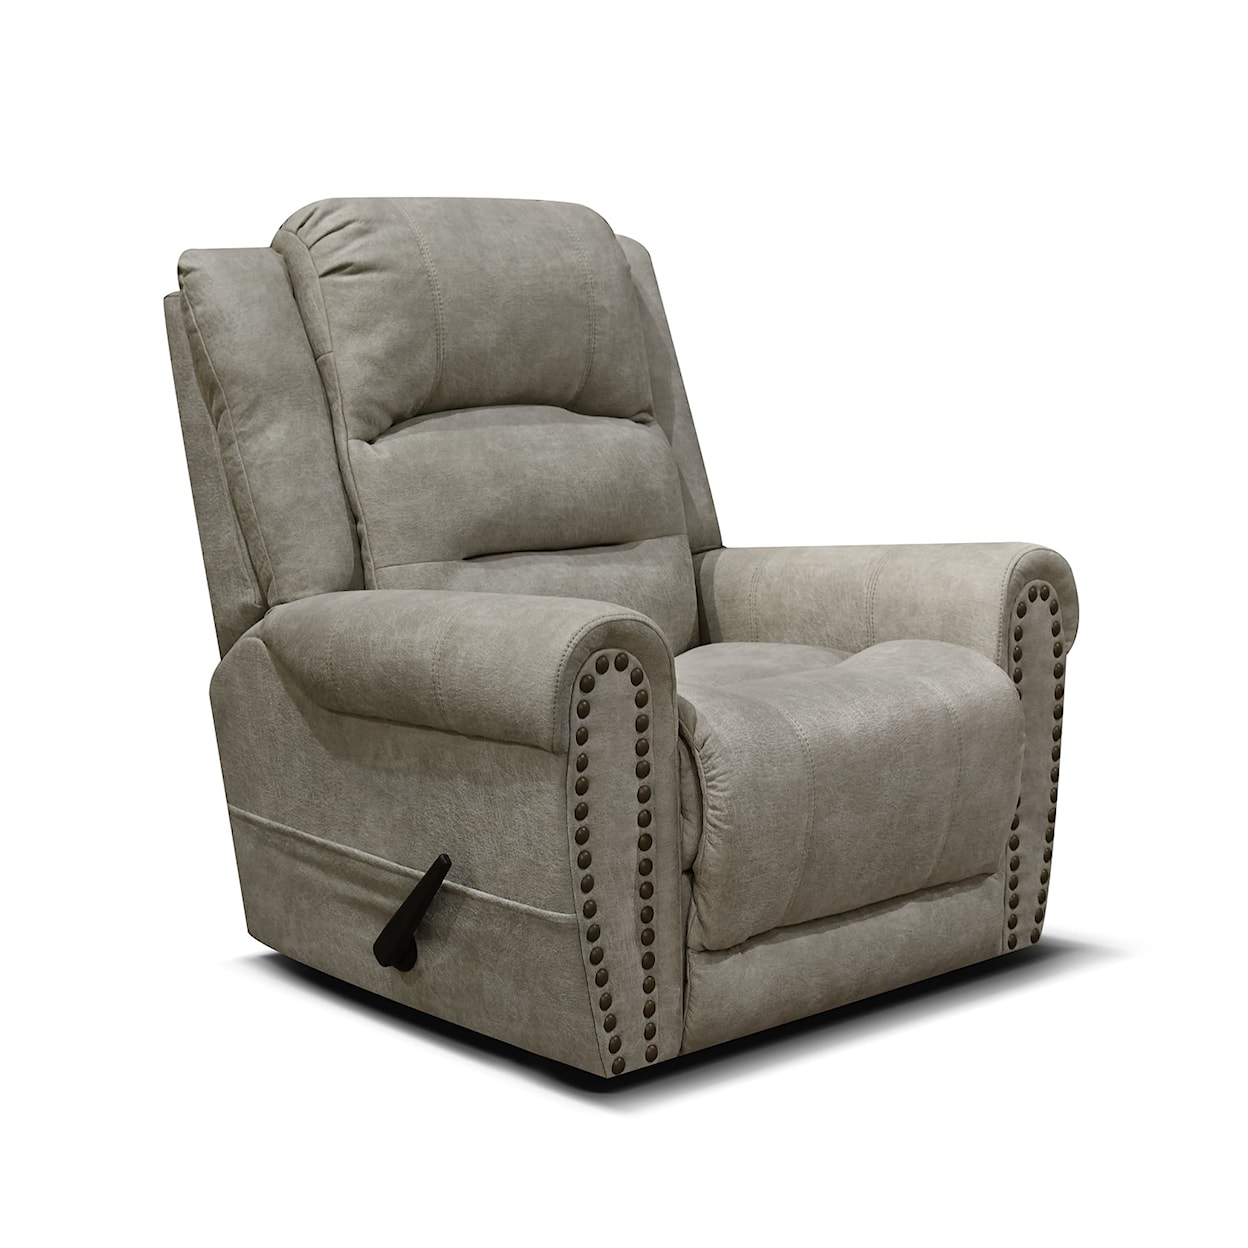 Tennessee Custom Upholstery 1950/N Series Swivel Gliding Recliner with Nailhead Trim